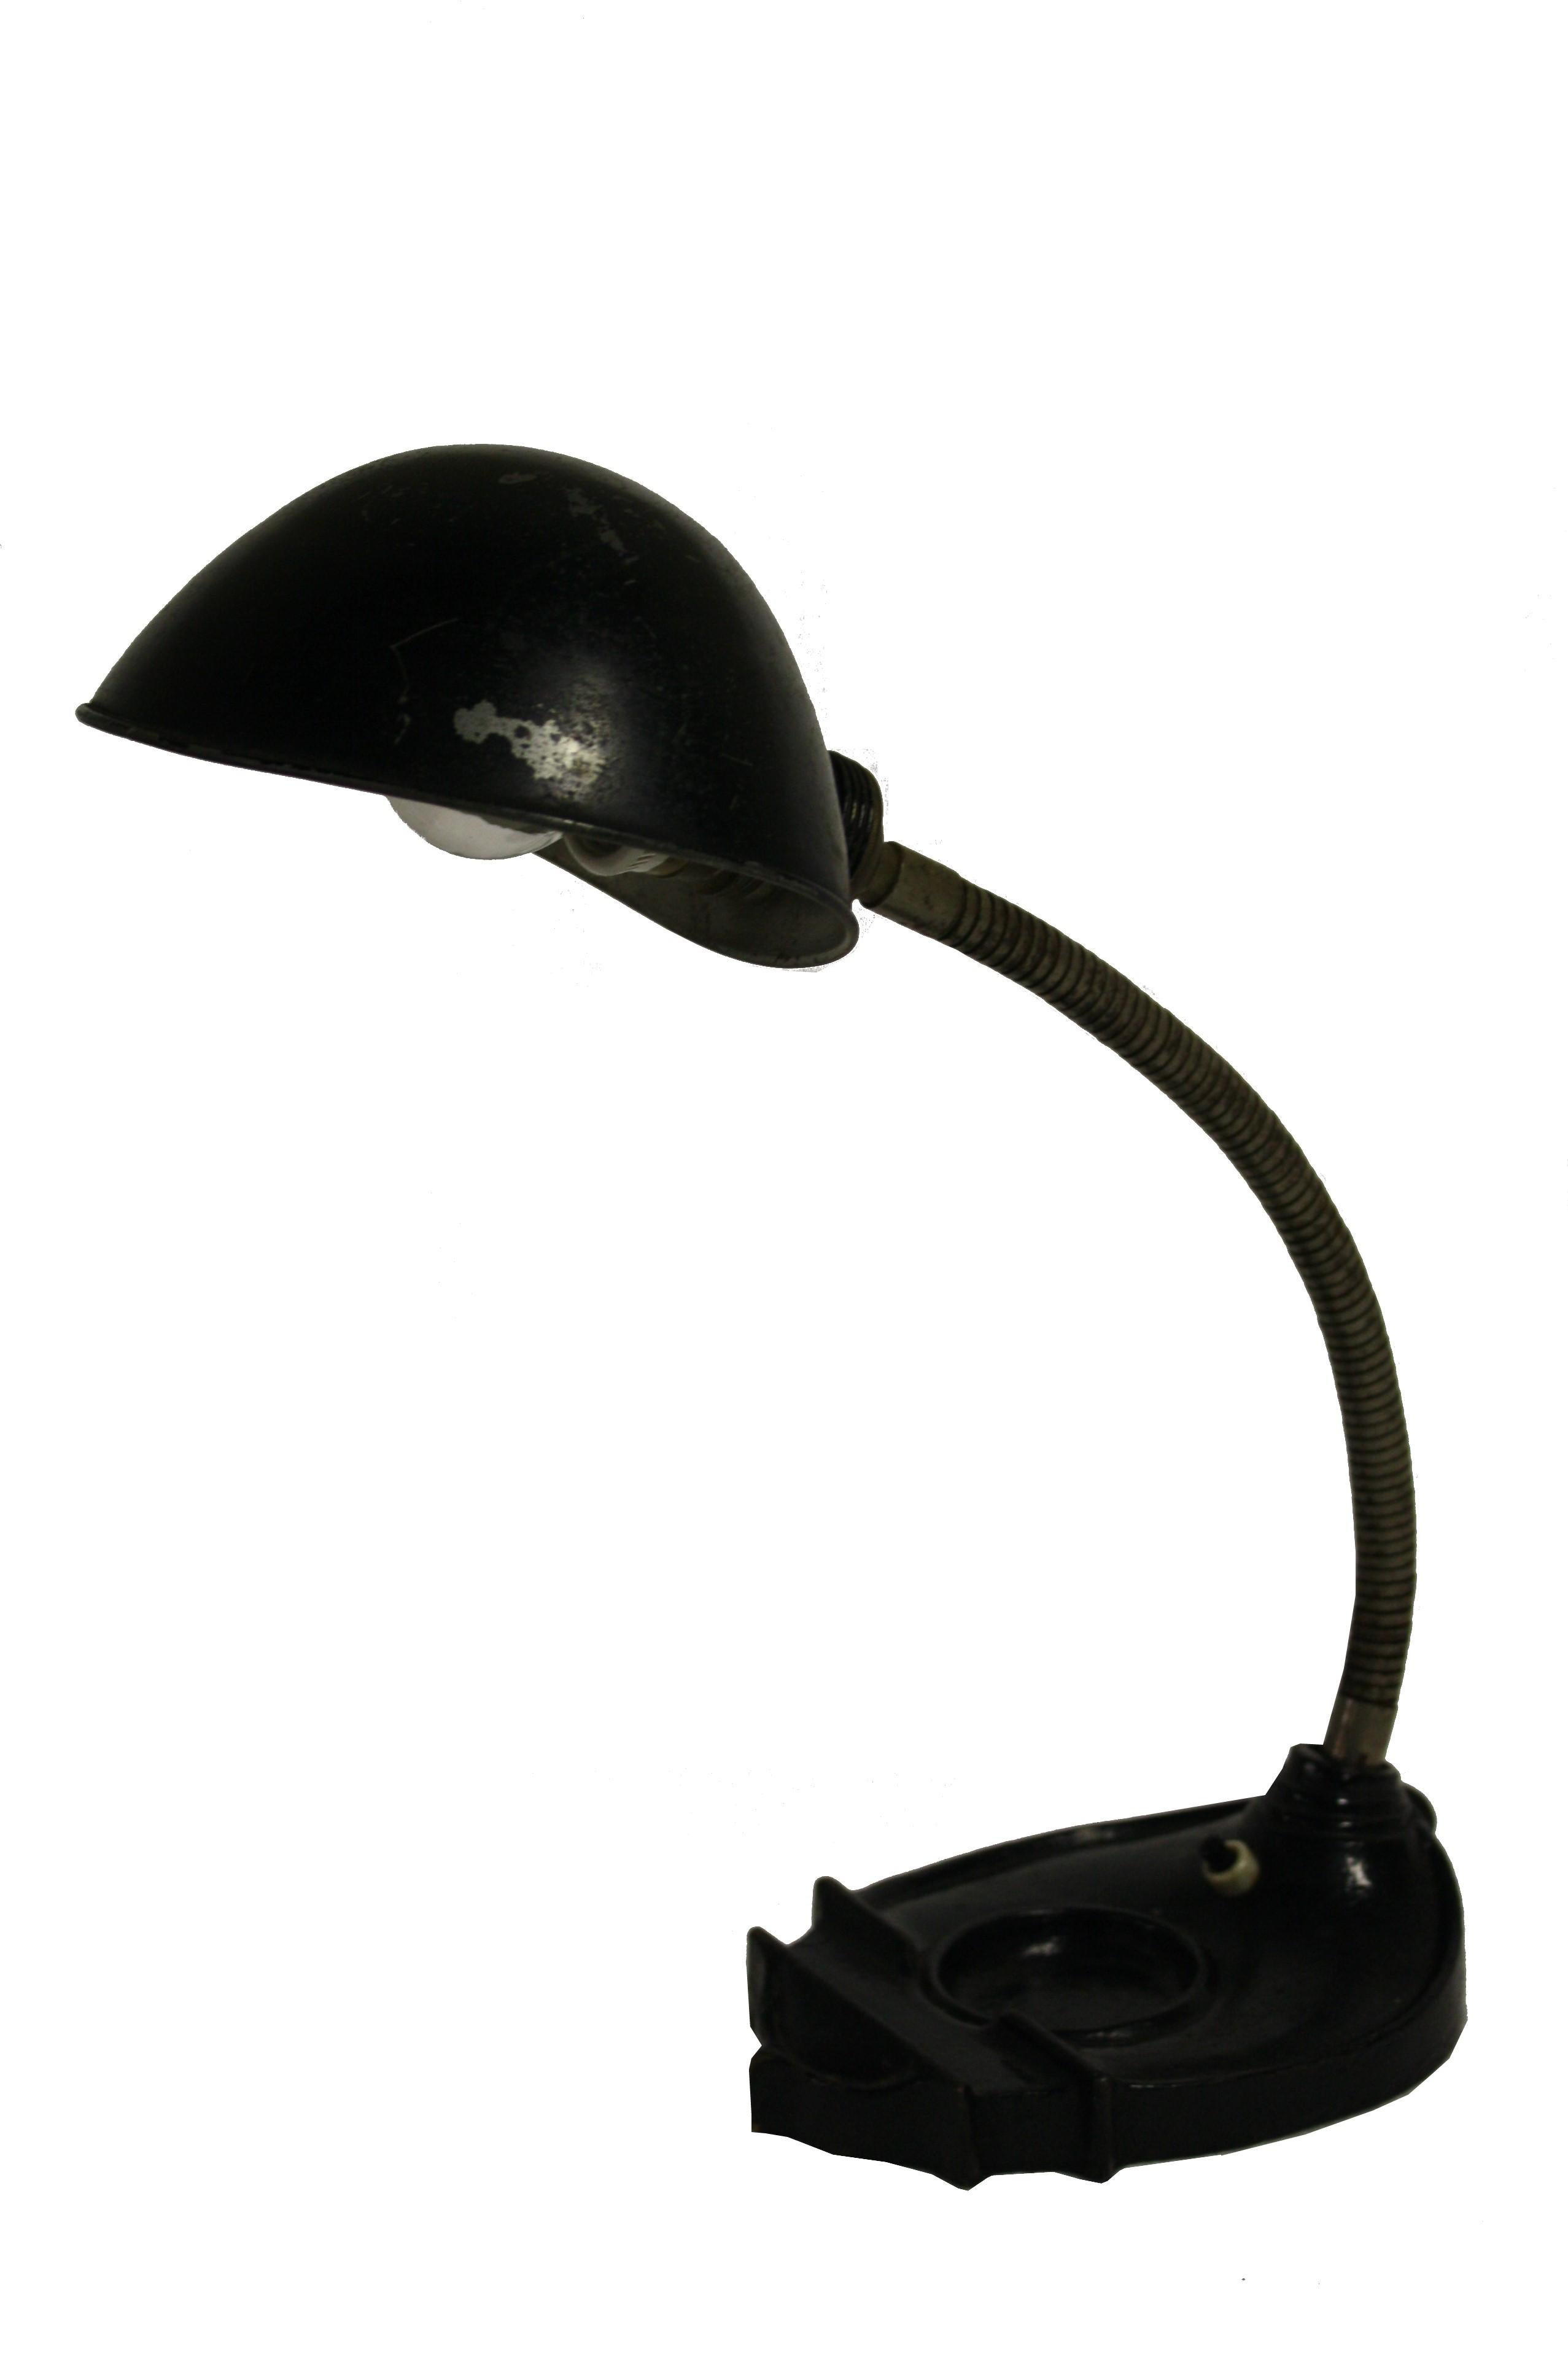 Art Deco gooseneck table lamp or work light by the Belgian company Erpe.

The lamp has an olive green color with some patina on the base.

The light is adjustable thanks to a flexible arm and has a cast iron base.

Original 'Erpe' label is